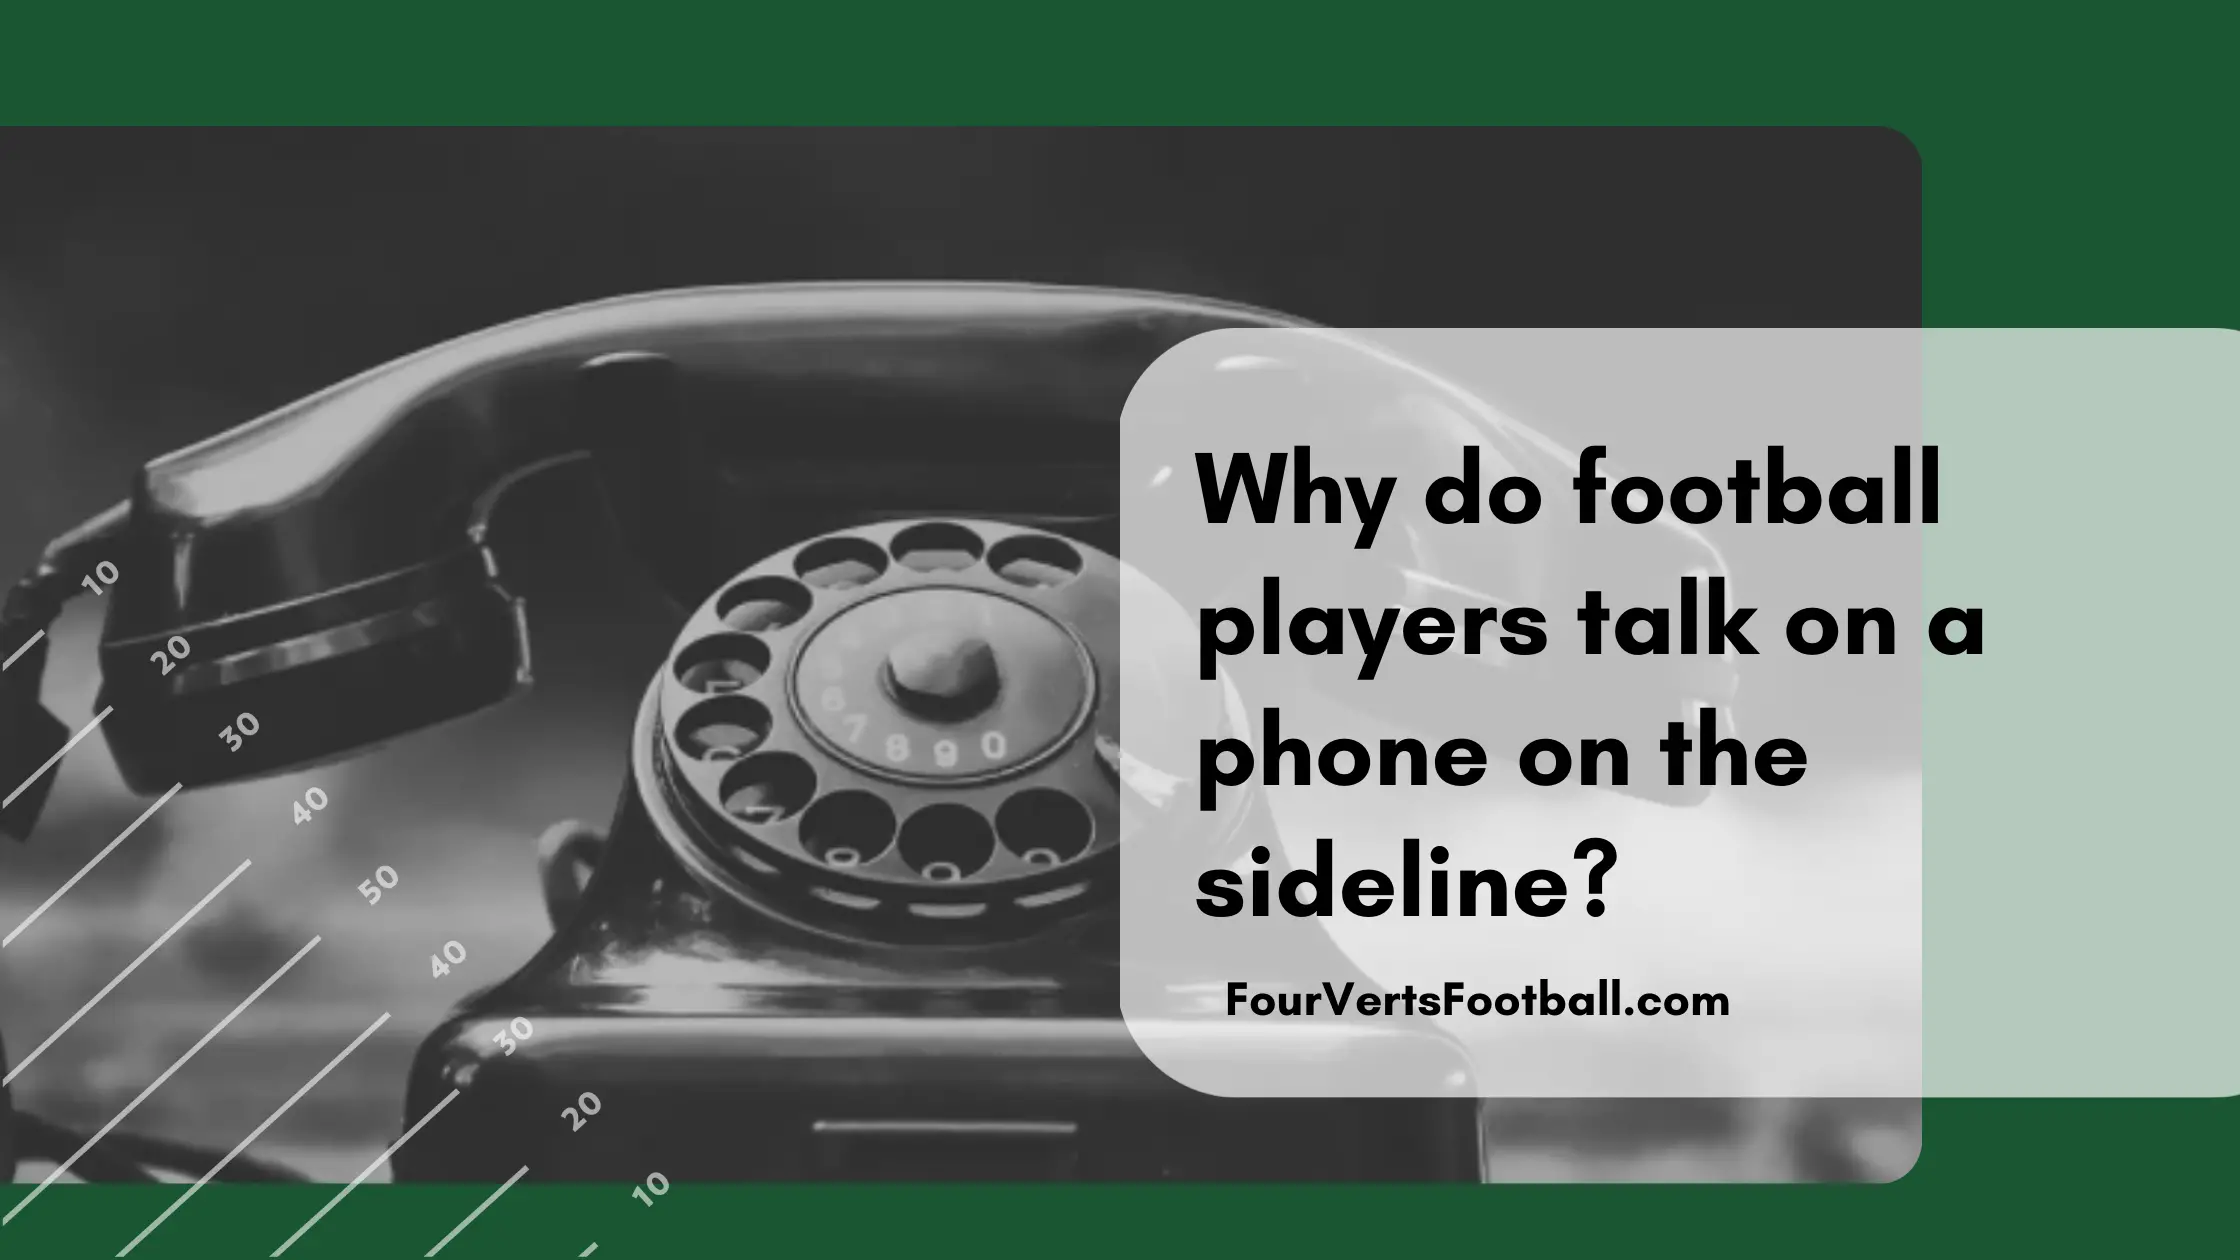 Why do football players talk on a phone on the sideline